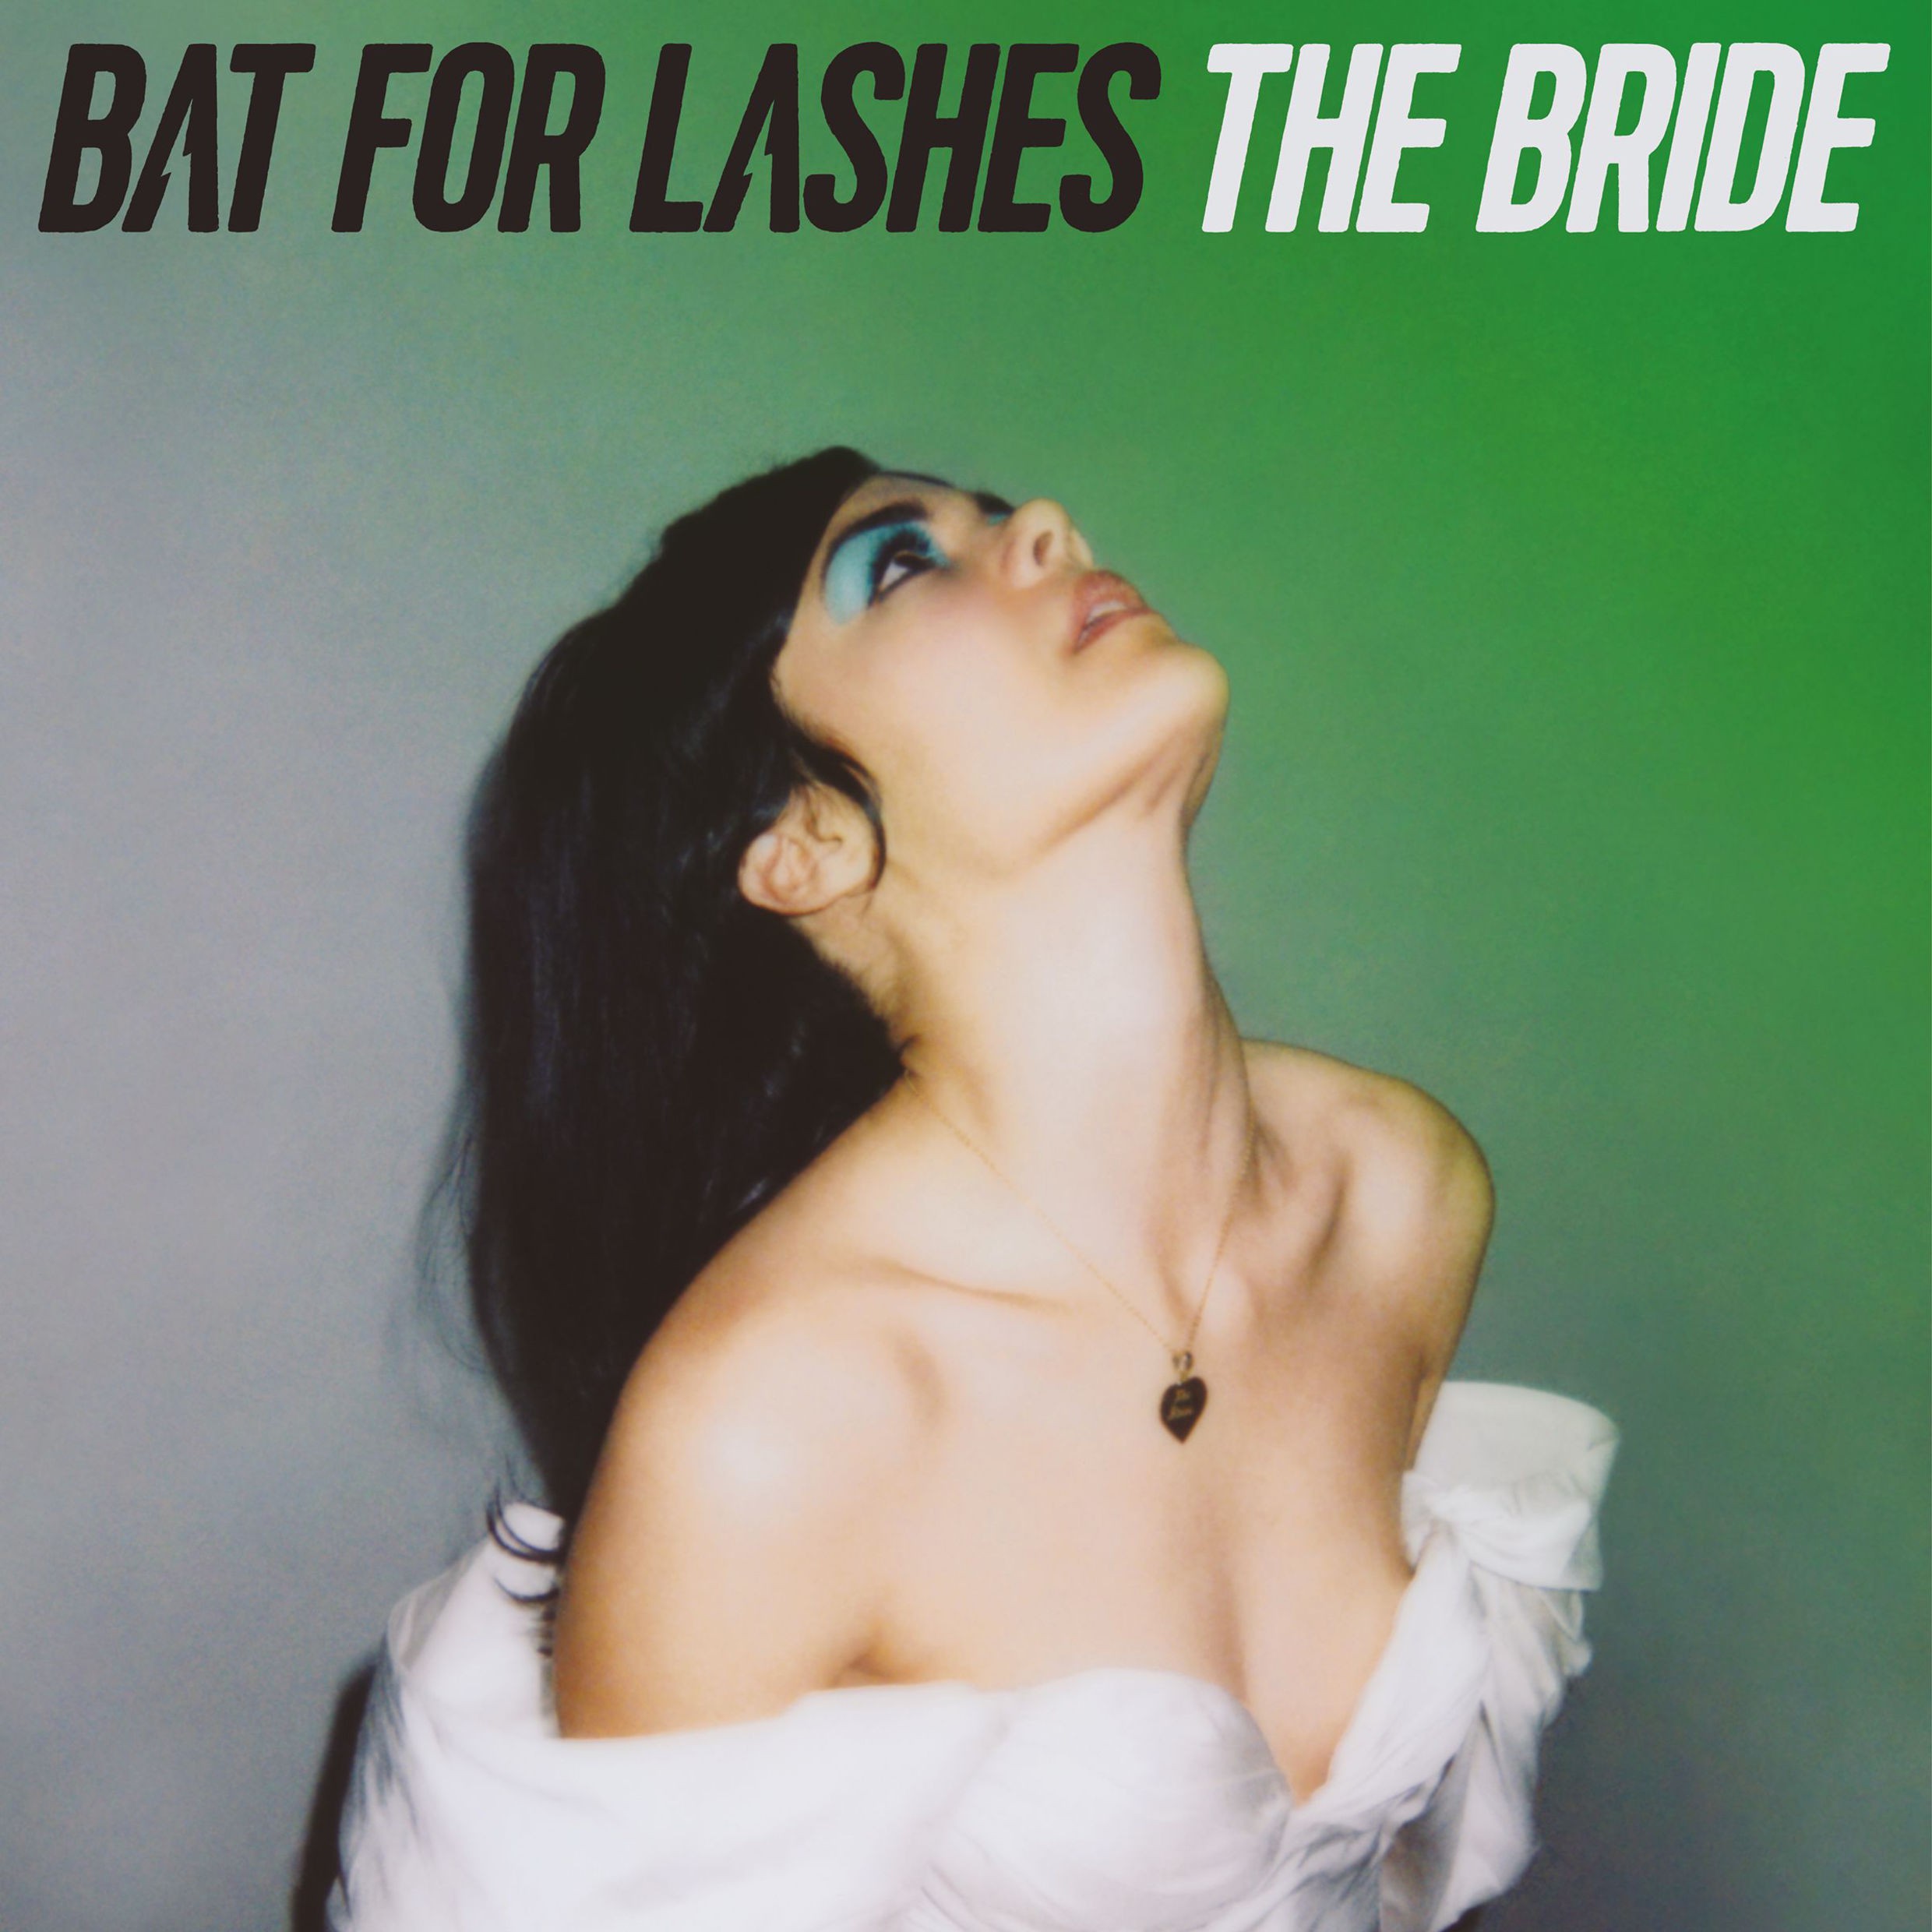 Bat for Lashes The Bride cover artwork